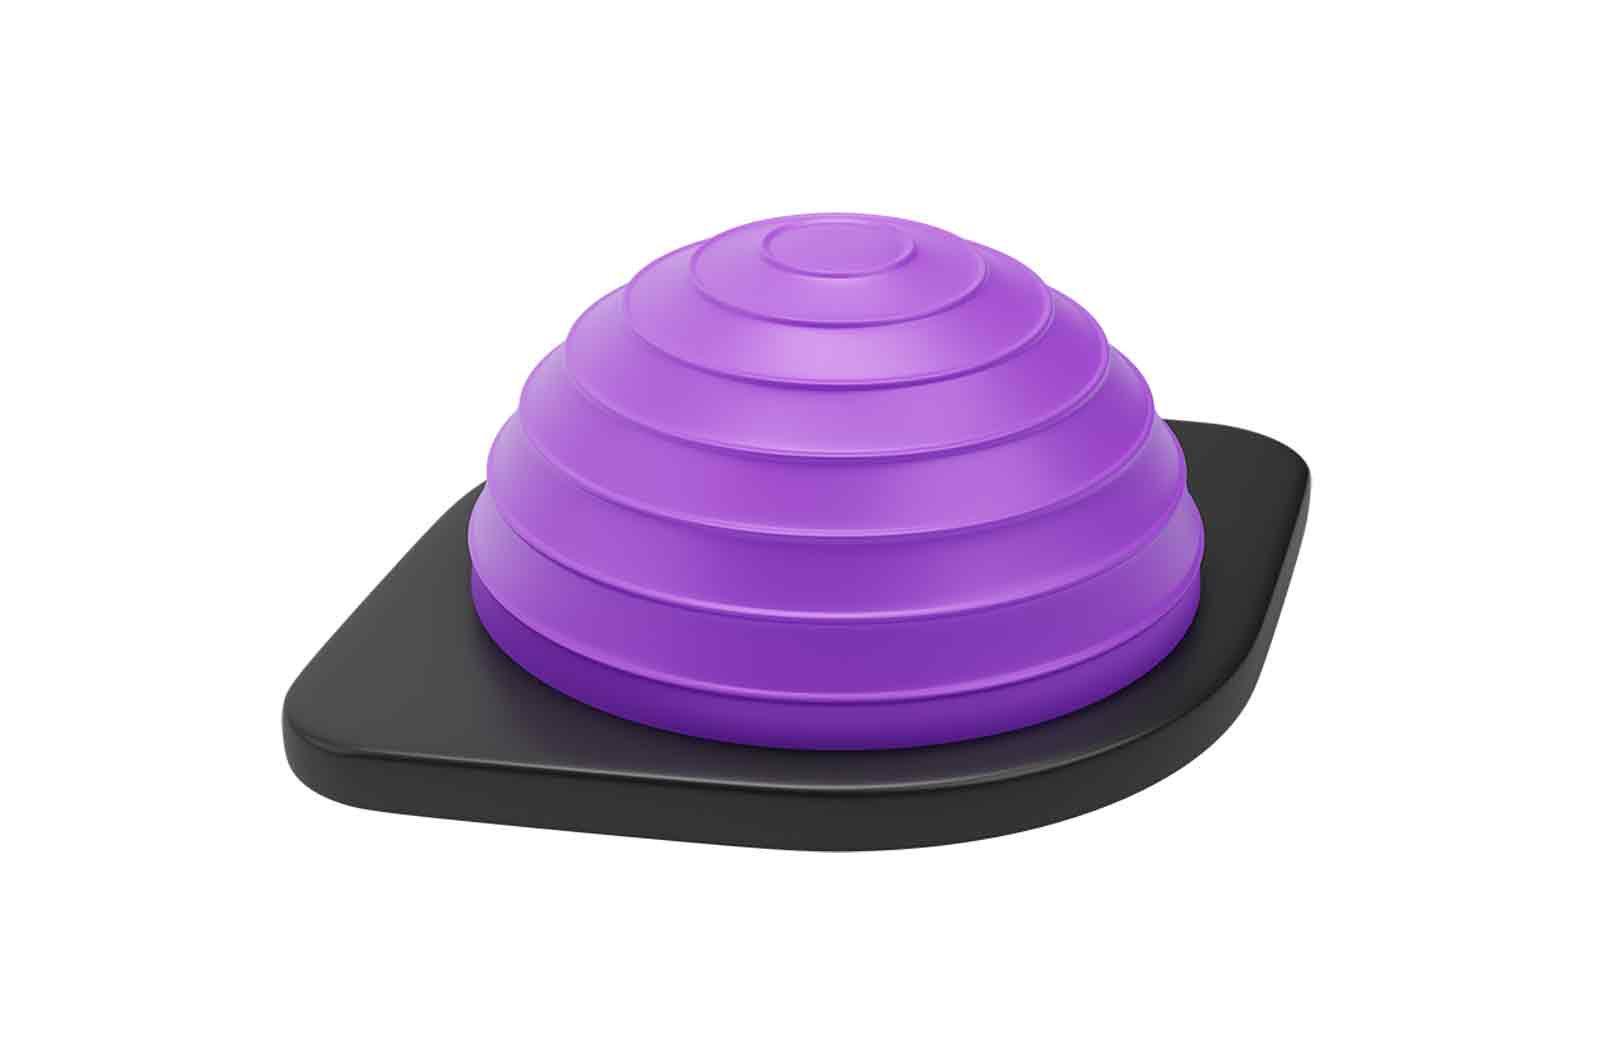 Blue fitness balance ball on stand 3d rendered illustration. Equipment for yoga, pilates or home training. Sports workout tools